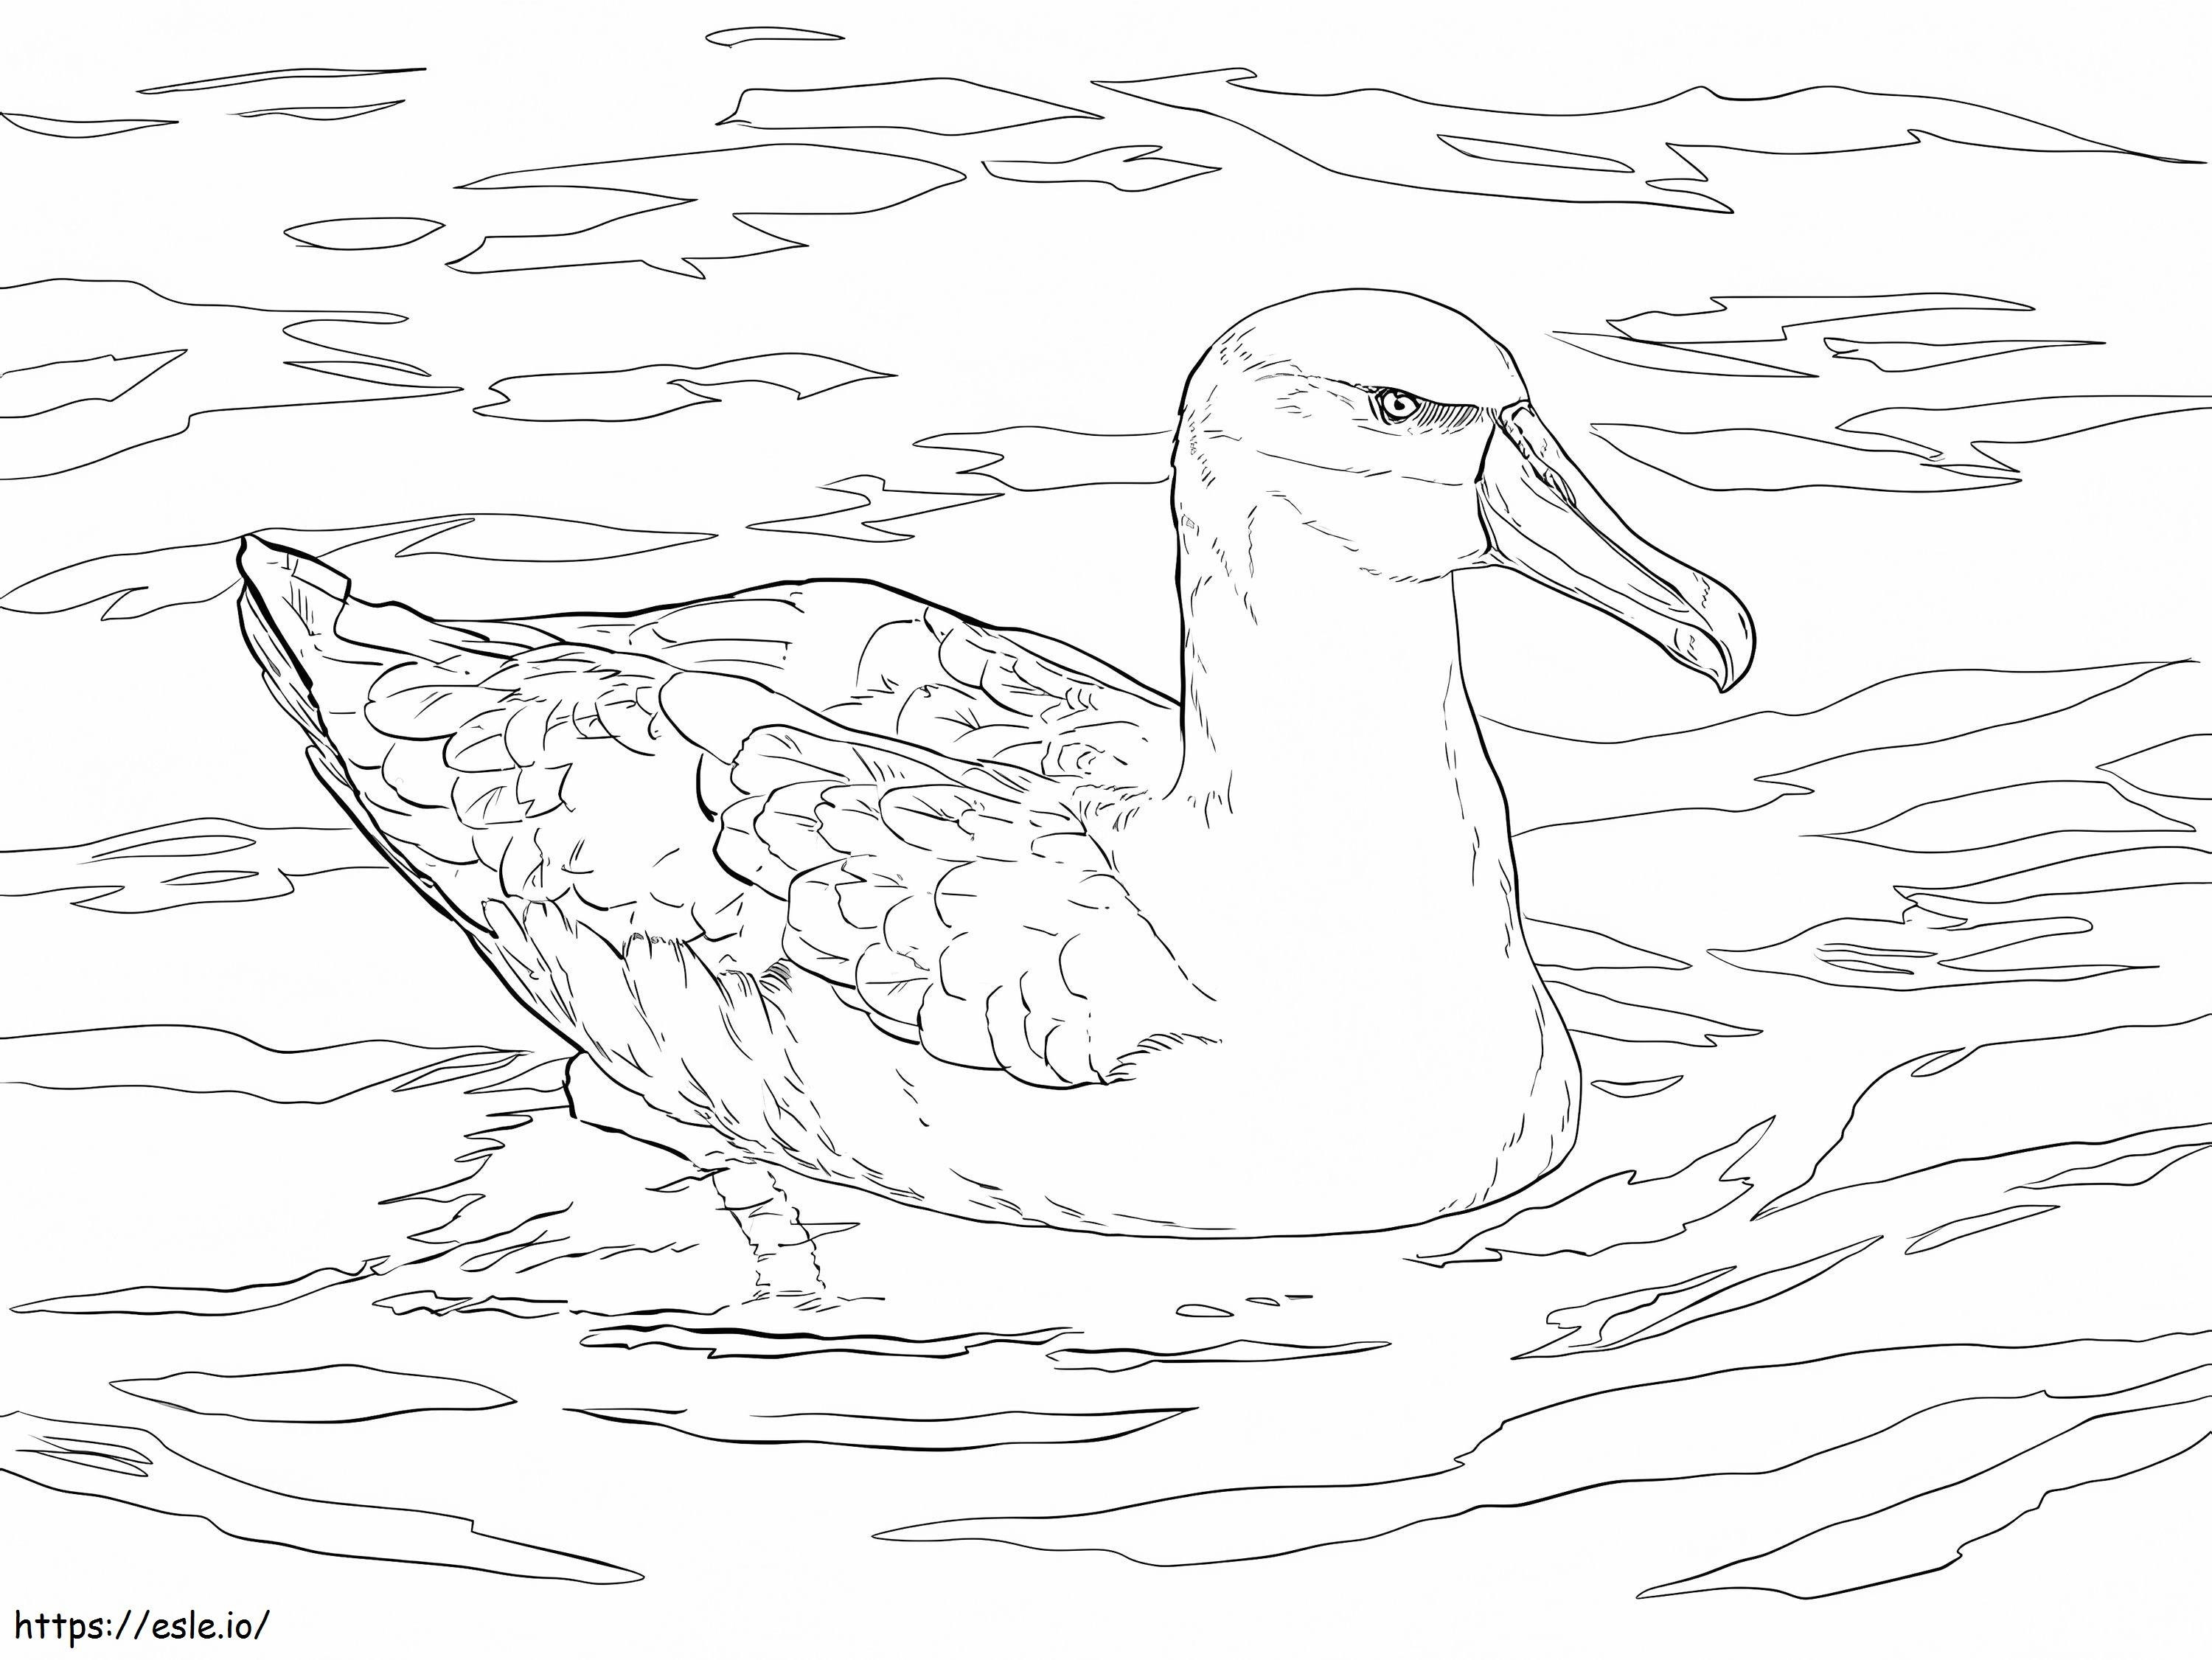 Shy Albatross coloring page